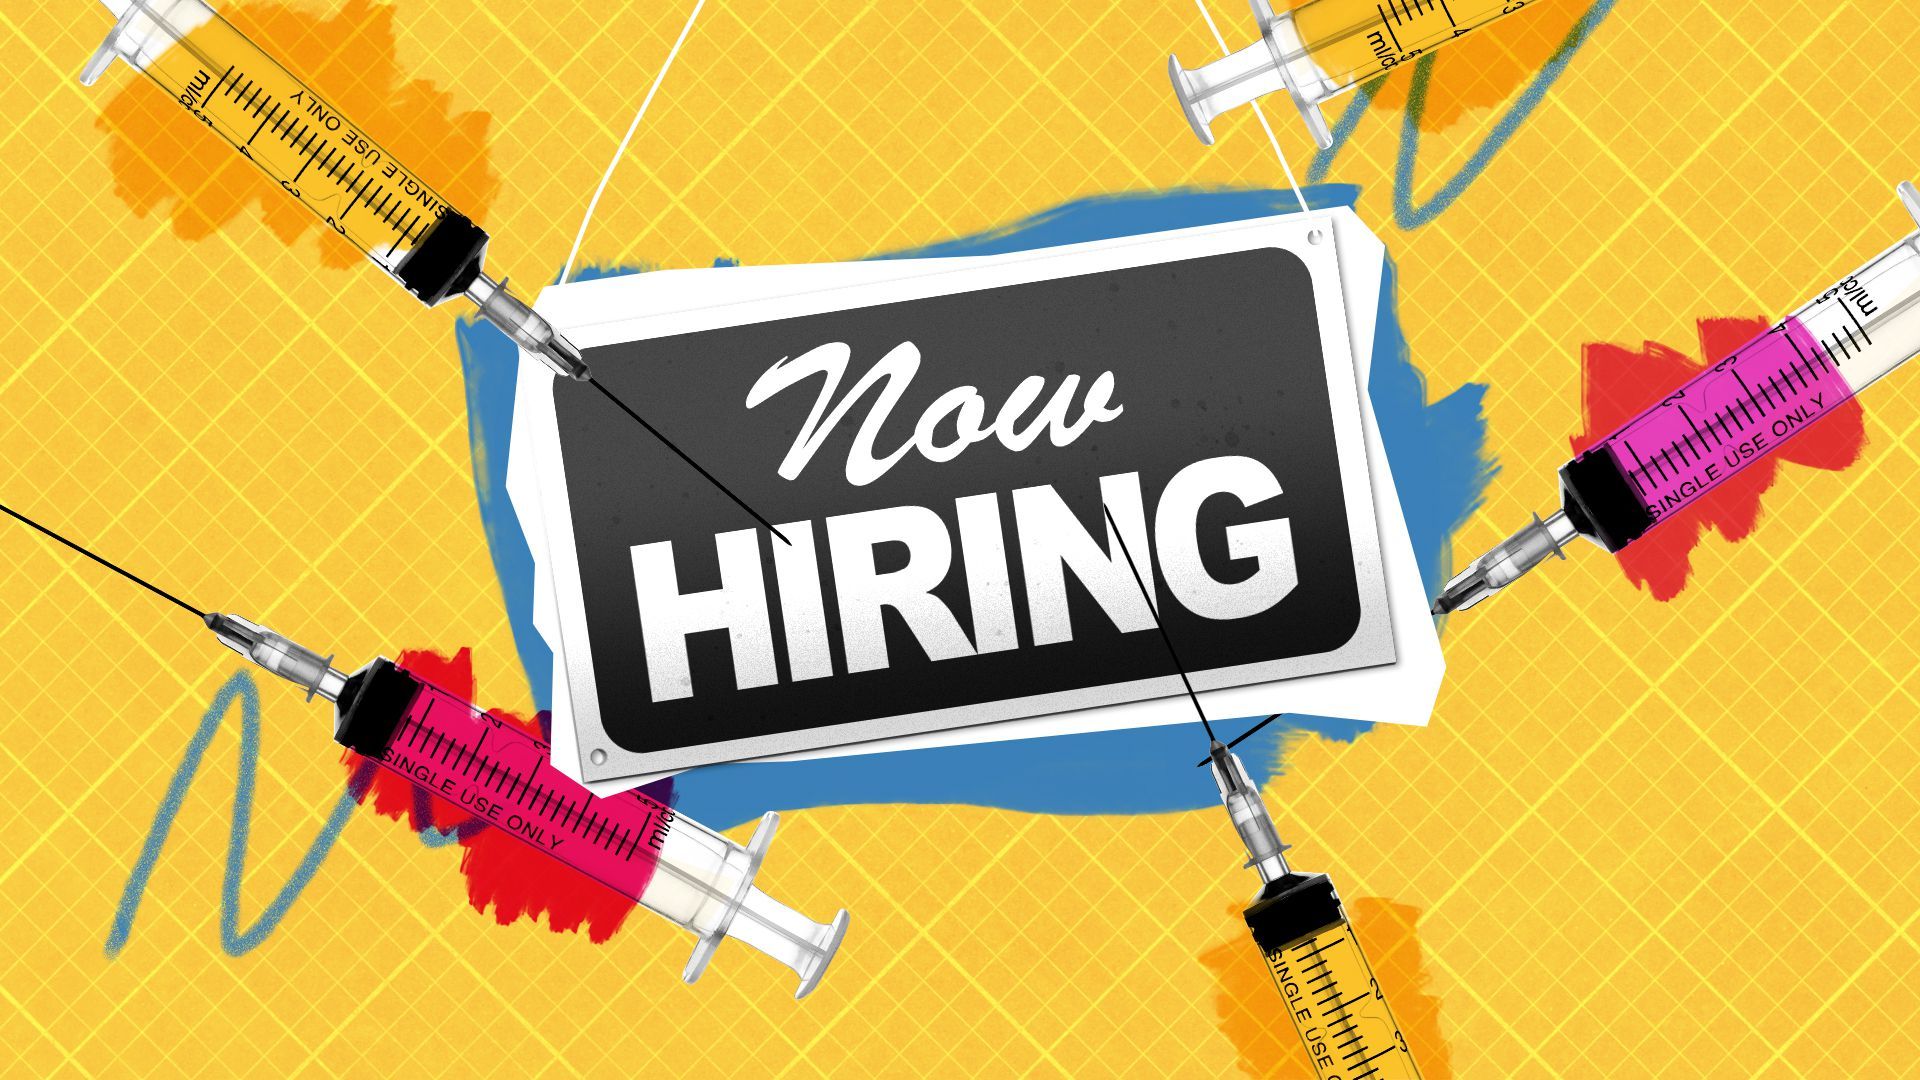 Illustration of a "now hiring sign" surrounded by syringes